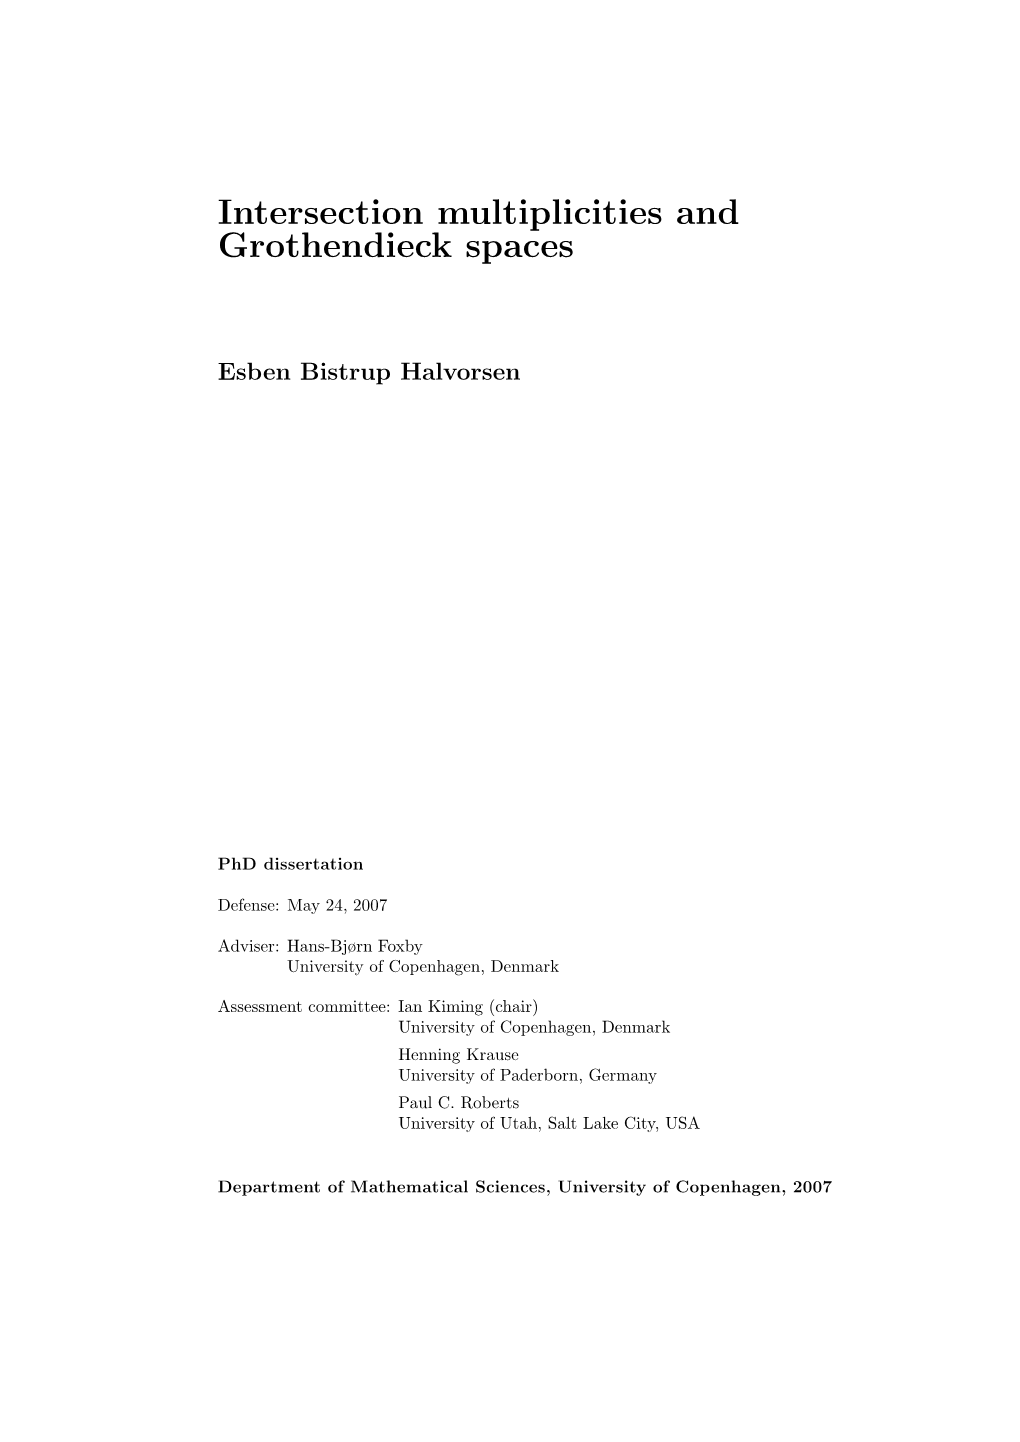 Intersection Multiplicities and Grothendieck Spaces